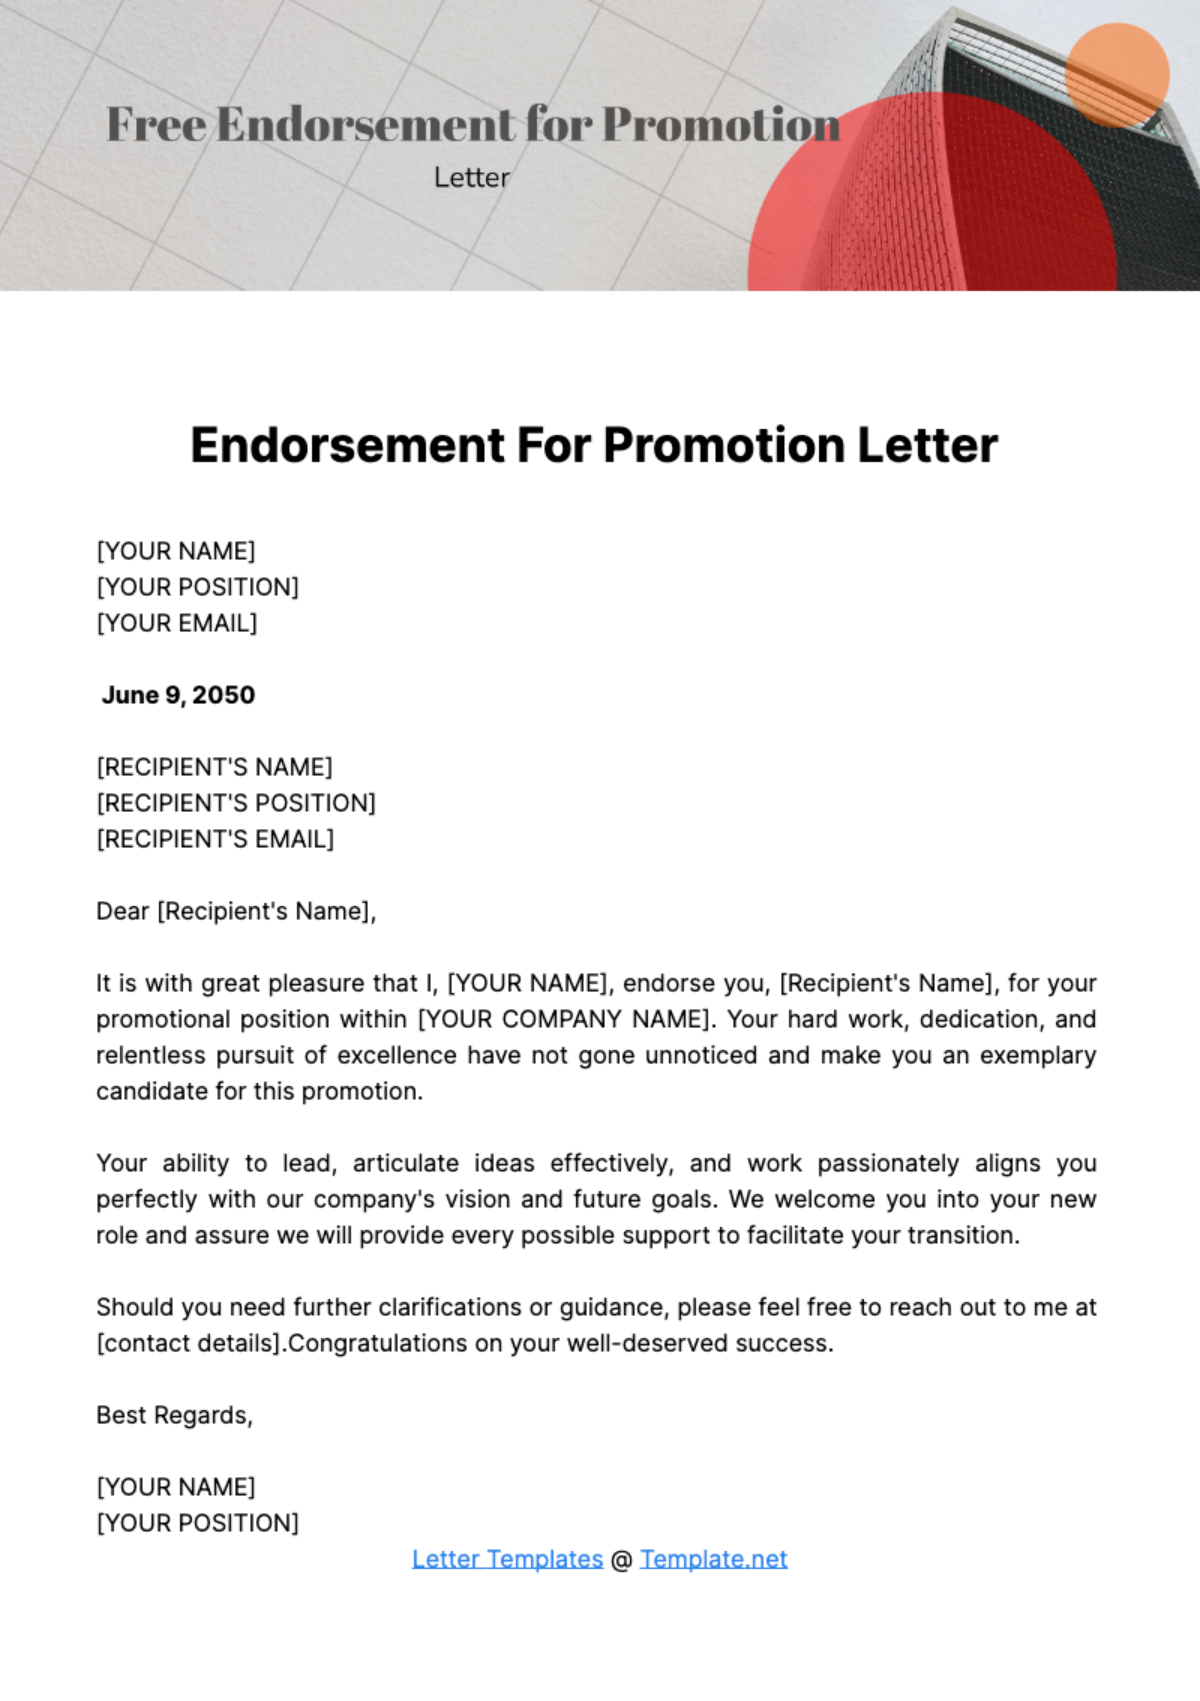 Free Endorsement for Promotion Letter Template